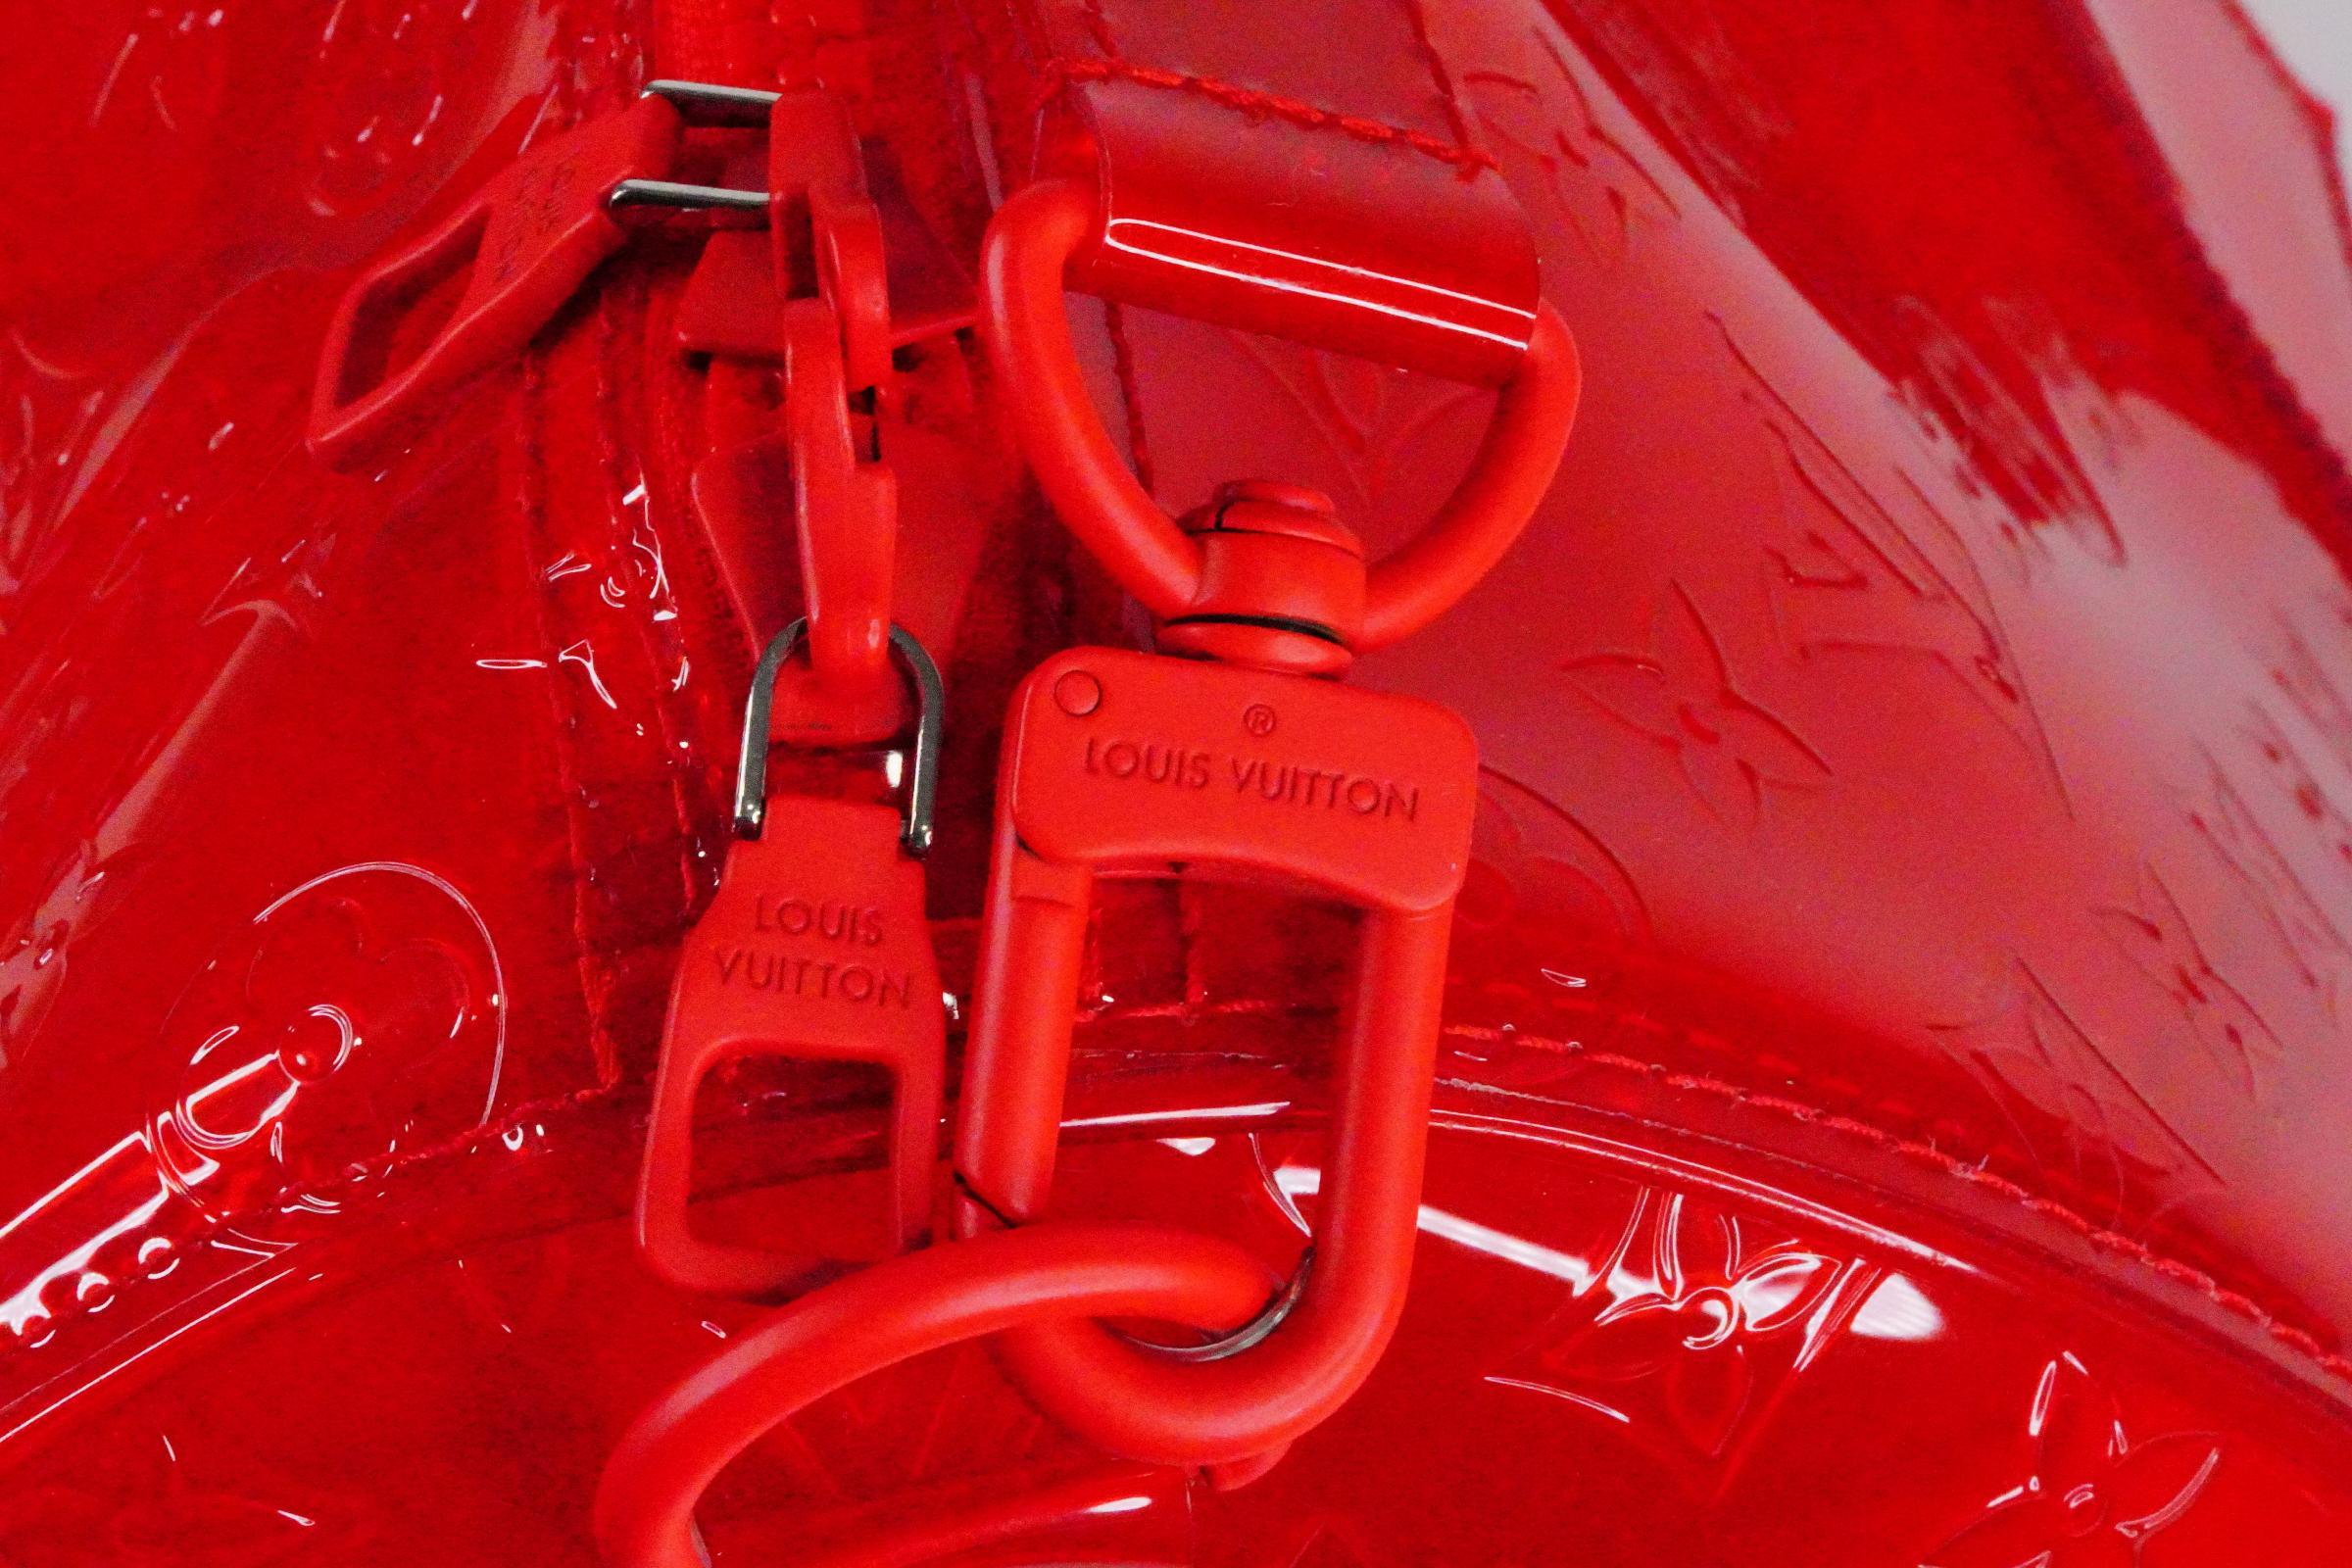 Keepall Clear SS19 Virgil Abloh Bandouliere 50 Red PVC